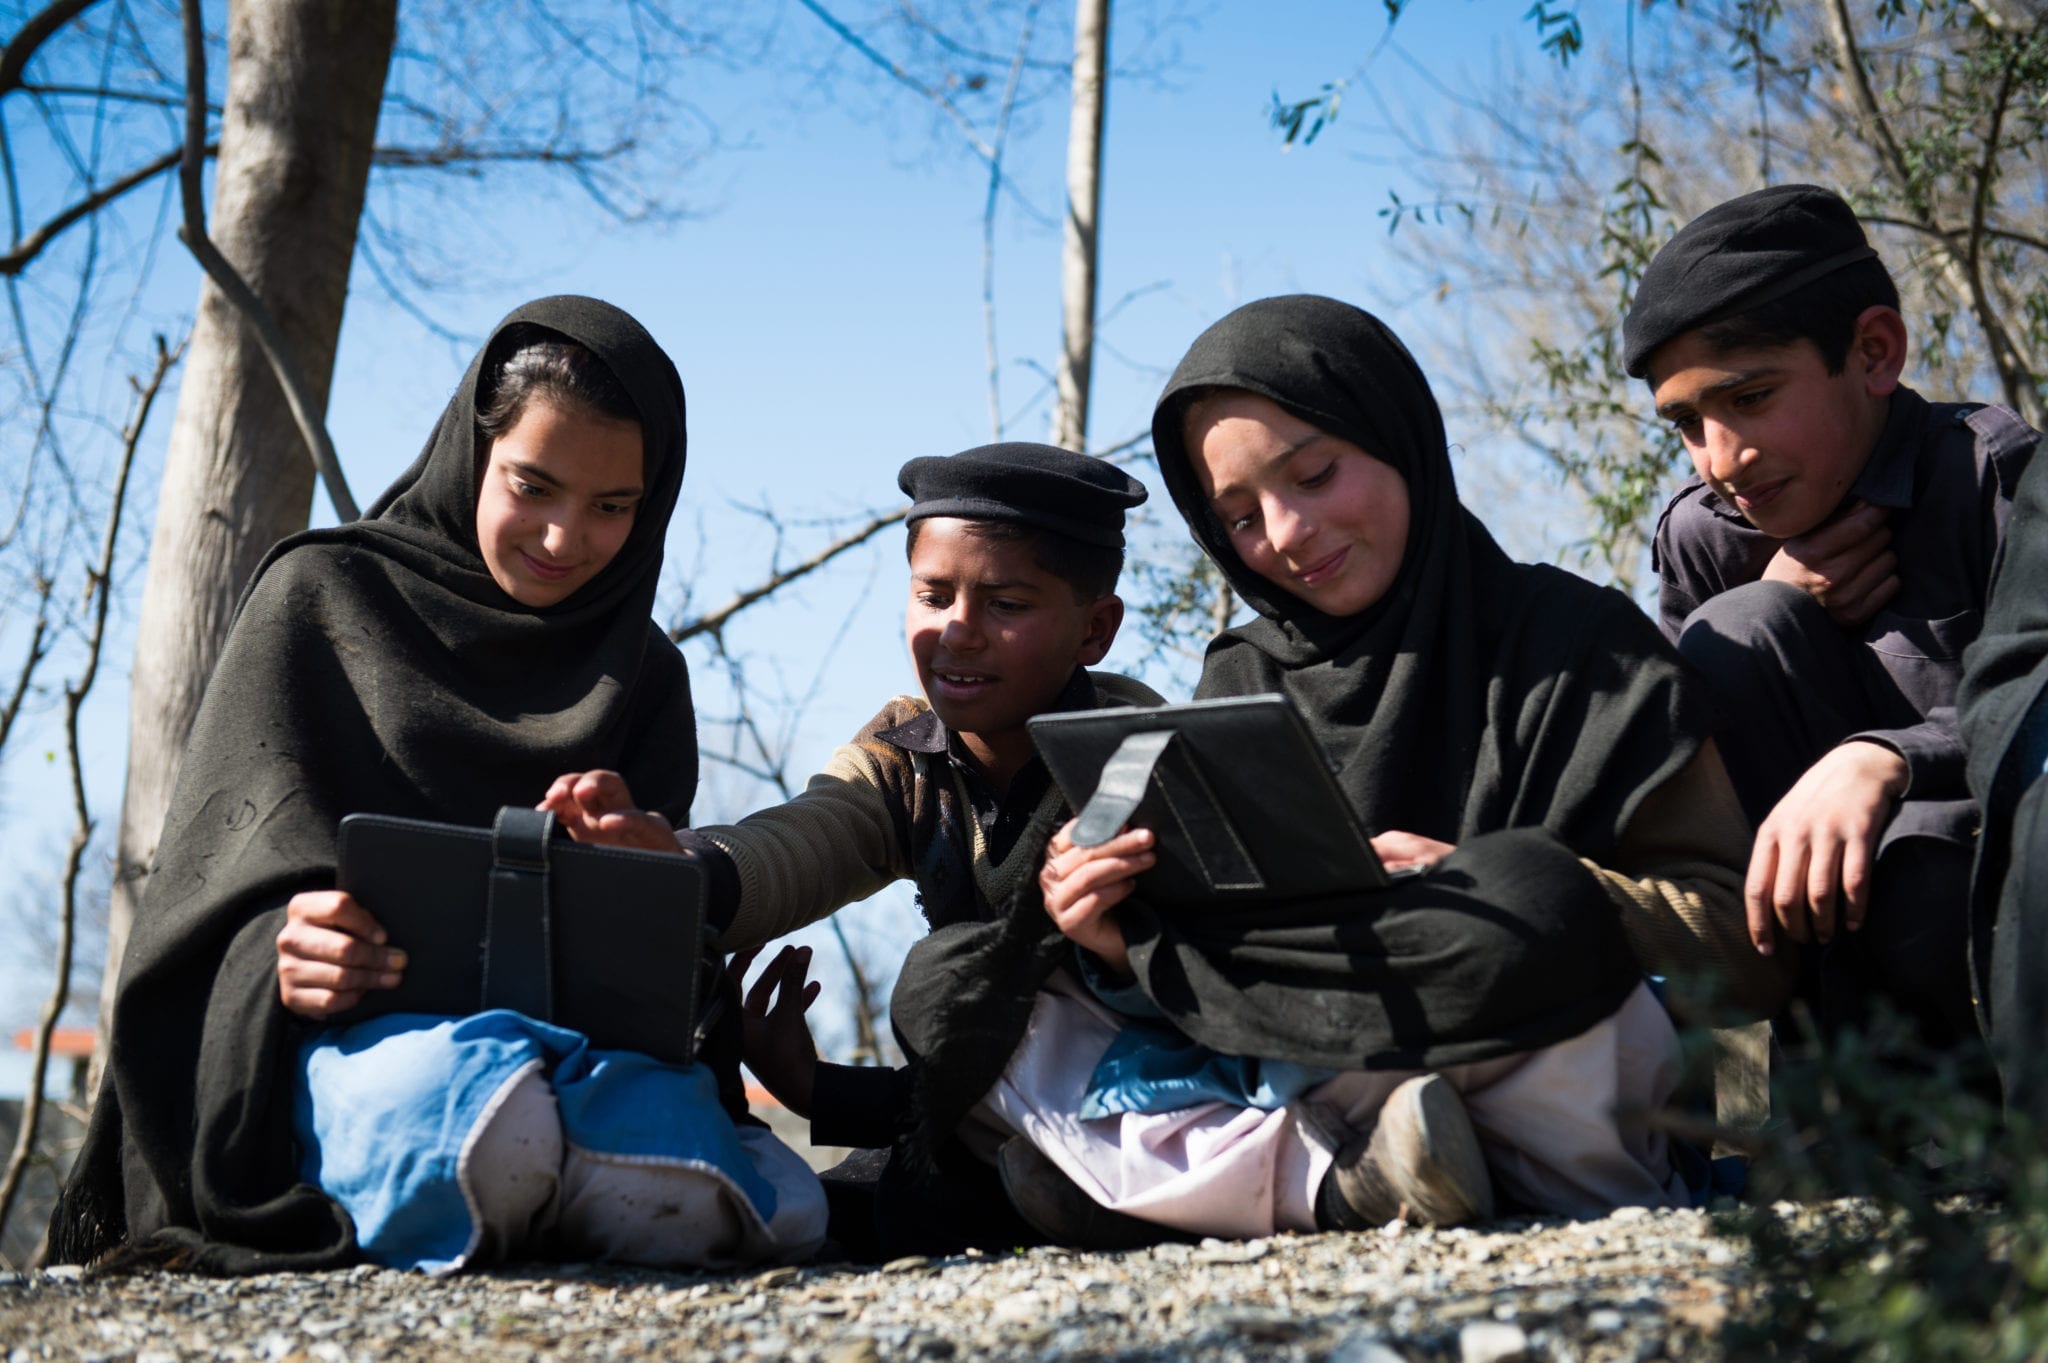 A group of children learn via tablet devices.